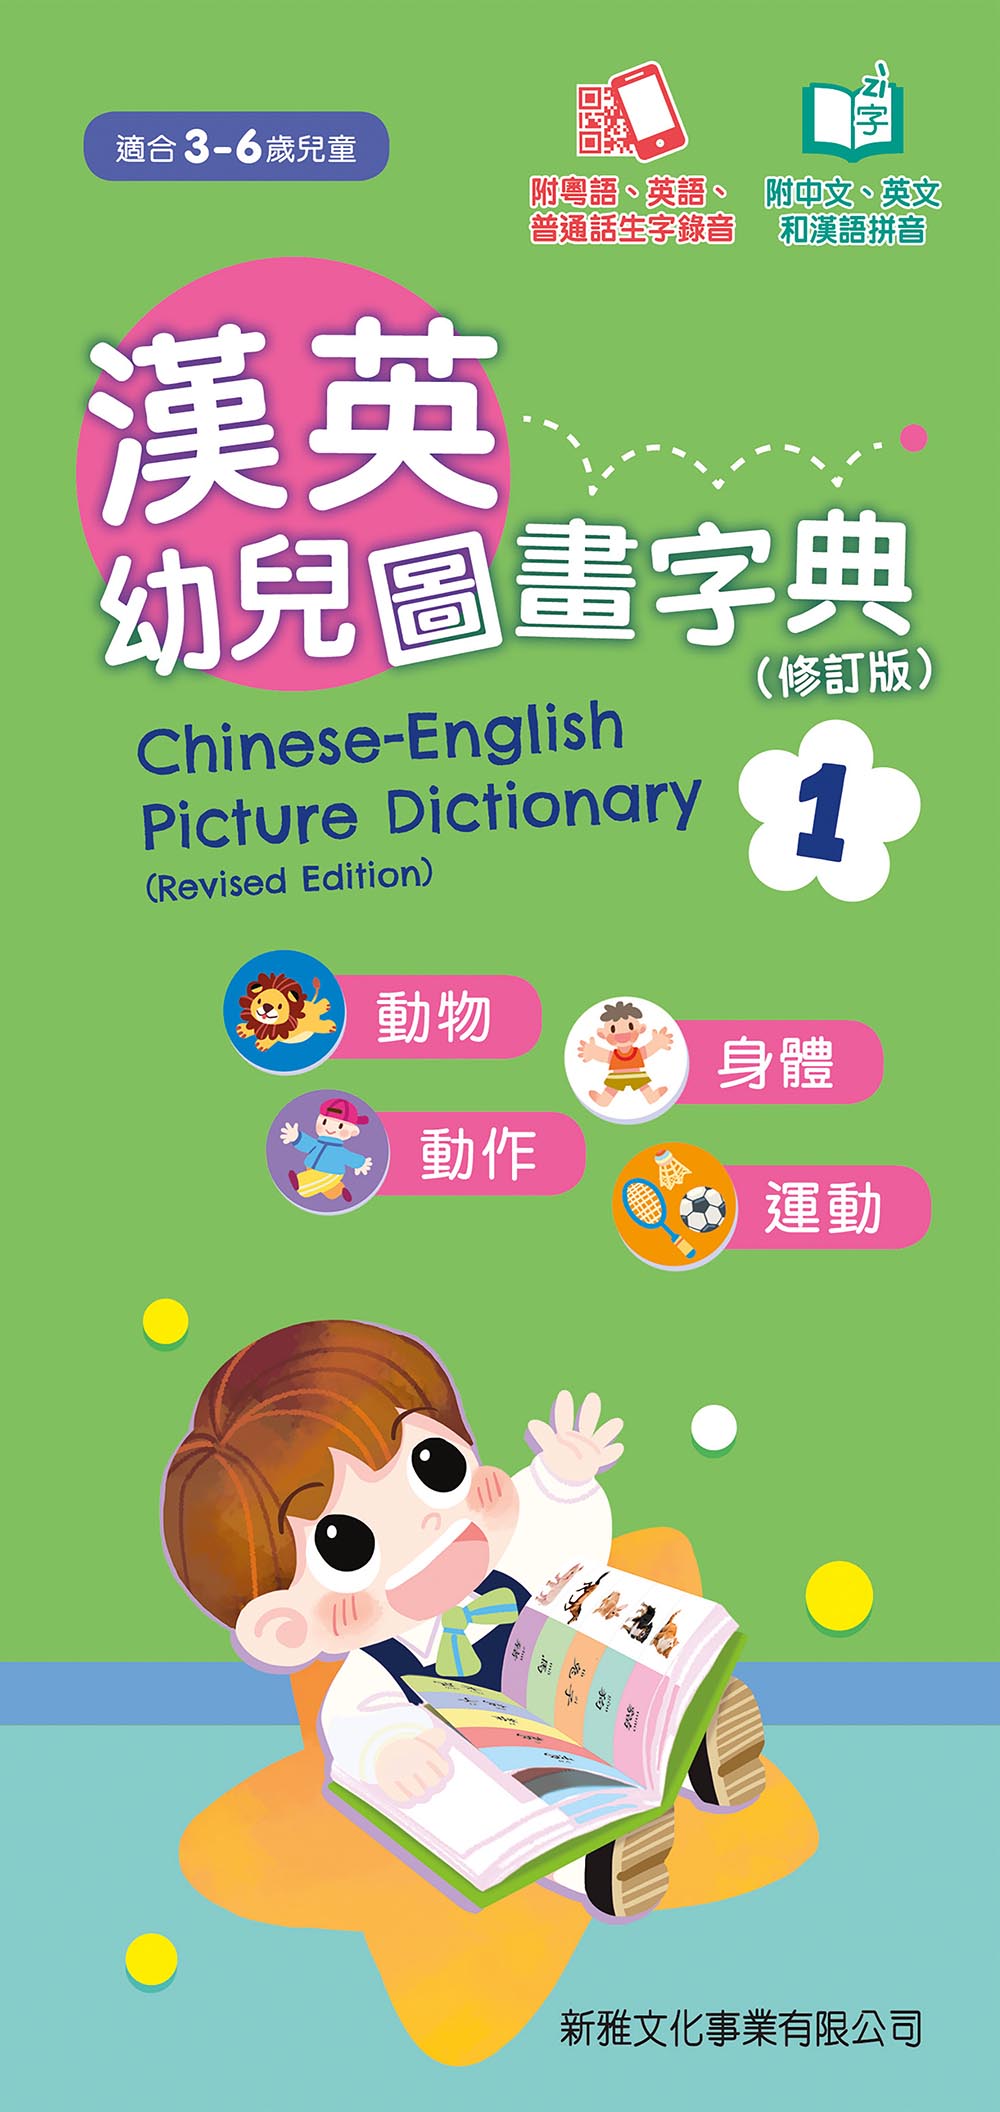 Chinese-English Picture Dictionary for Children #1 (Audio in Cantonese, Mandarin, and English - QR Code) • 漢英幼兒圖畫字典1 (修訂版)  (QR Code)